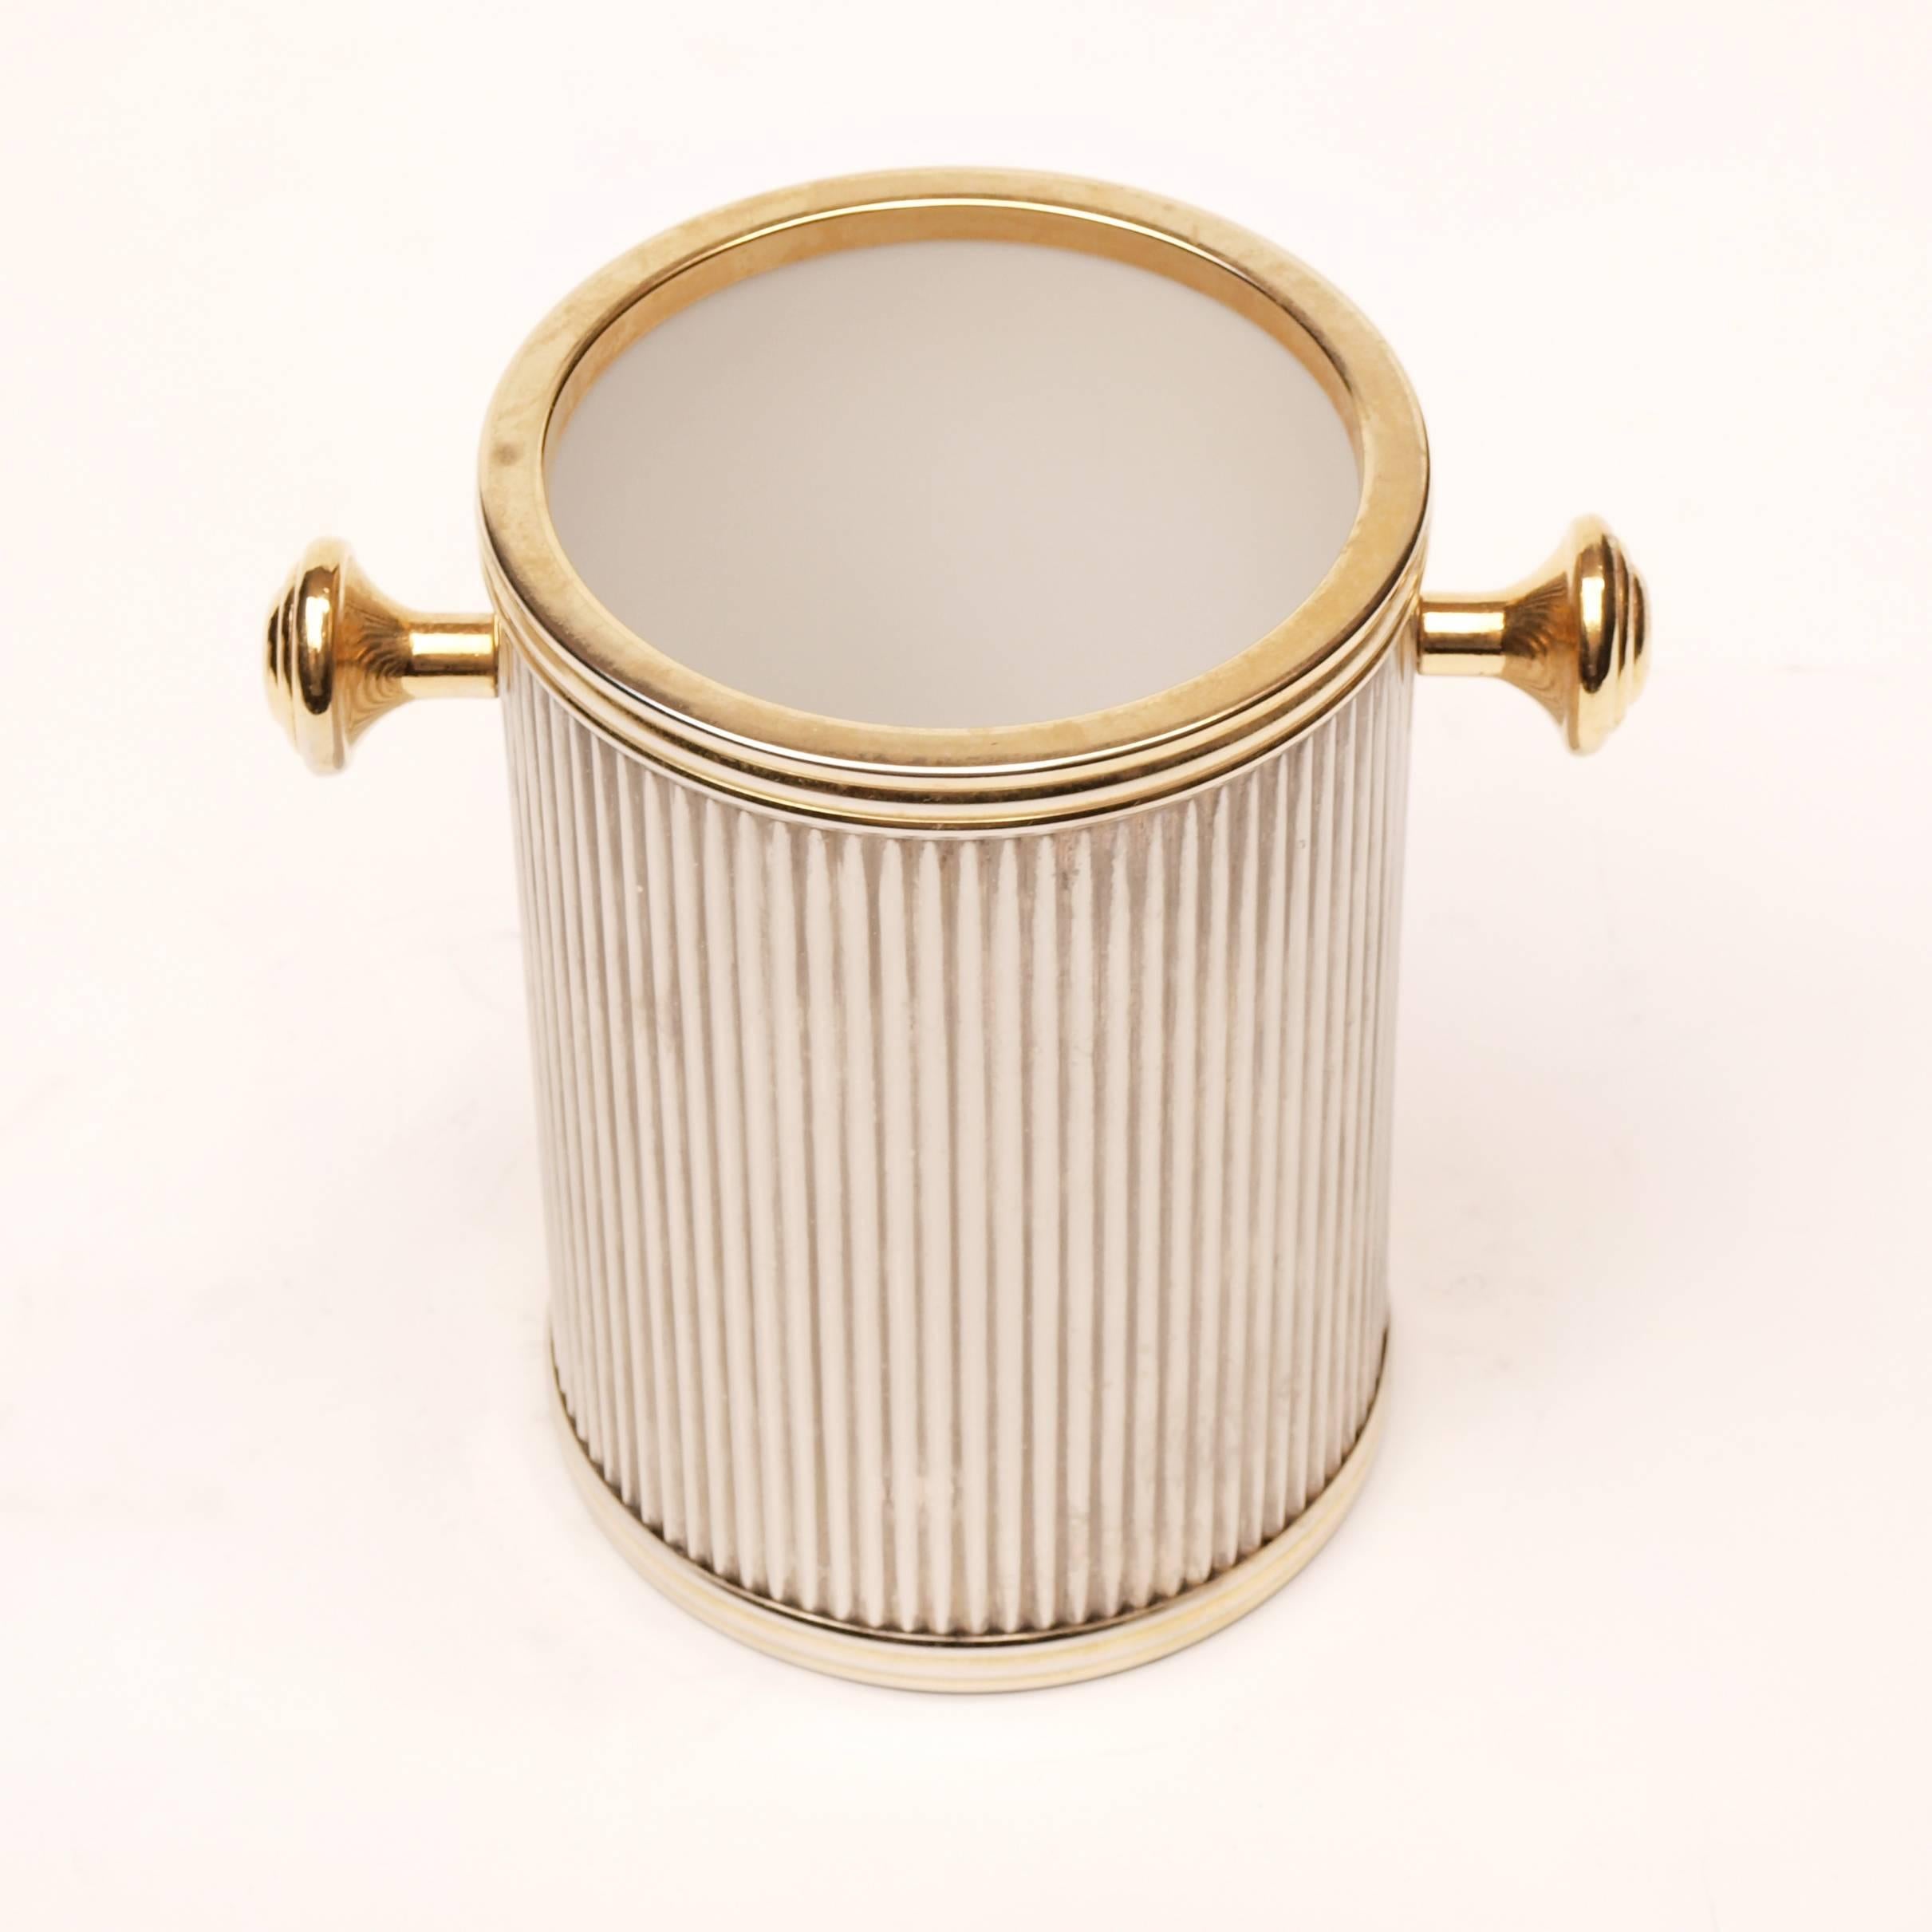 A glorious Ice bucket and wine cooler set finished in ribbed silver with gold trim and a fabulous mirrored lid.